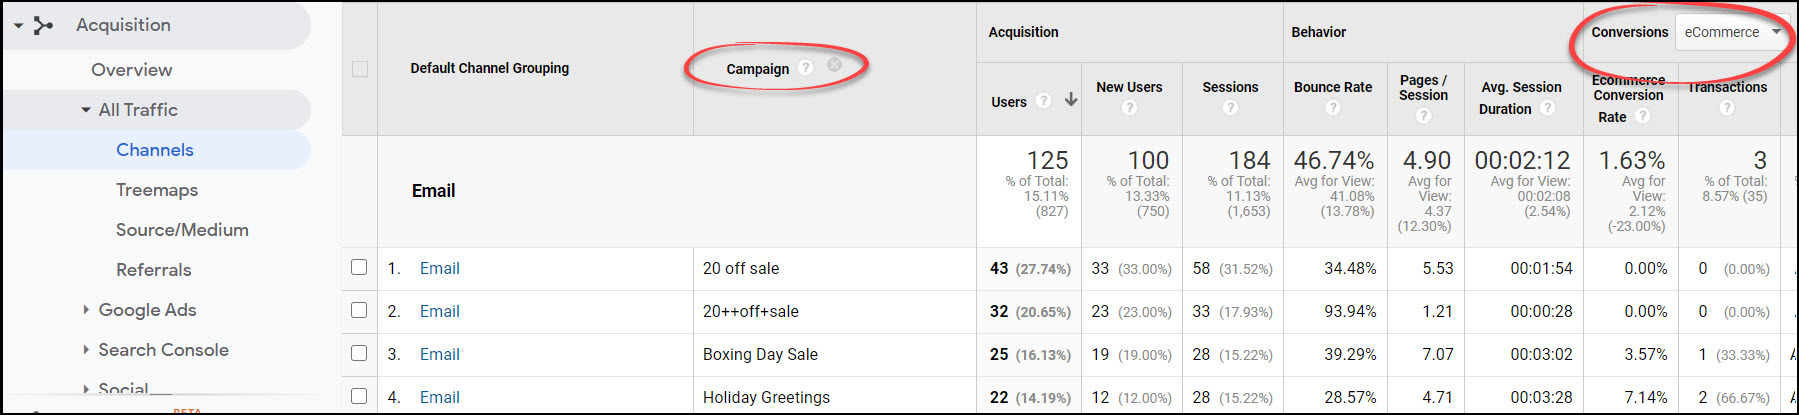 Google Analytics Acquisition Report w Campaign